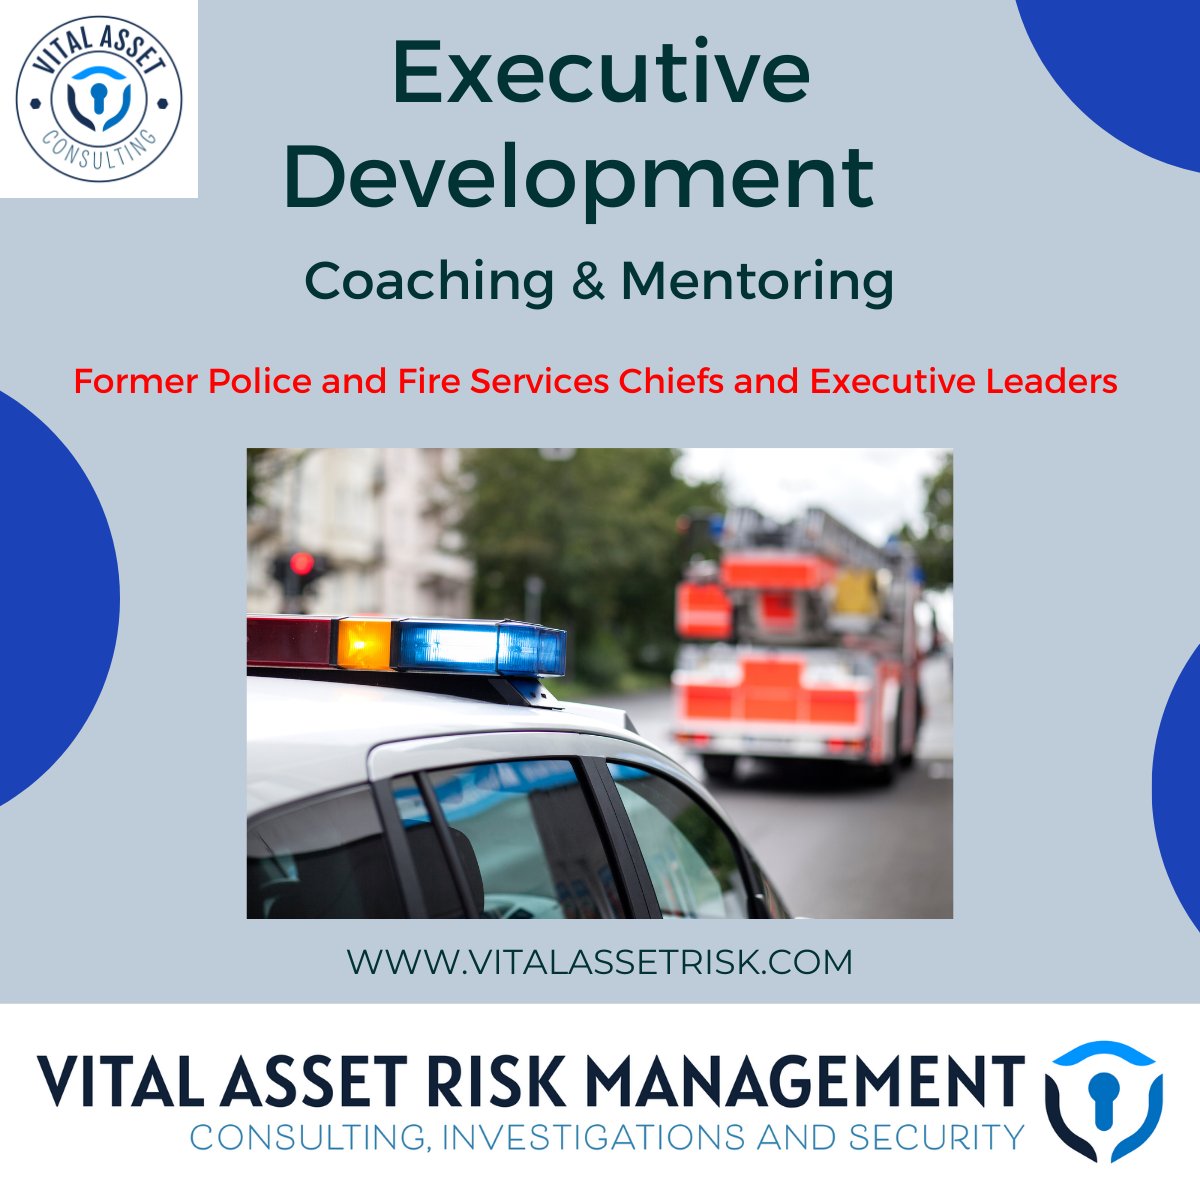 Vital Asset Risk Management: Elevate your leadership with expert coaching and mentoring from current and former -police/fire chiefs. Tailored, experience-driven guidance for tomorrow's leaders. #LeadershipEvolved #yyc #yycconsulting #coachingandmentoring vitalassetrisk.com